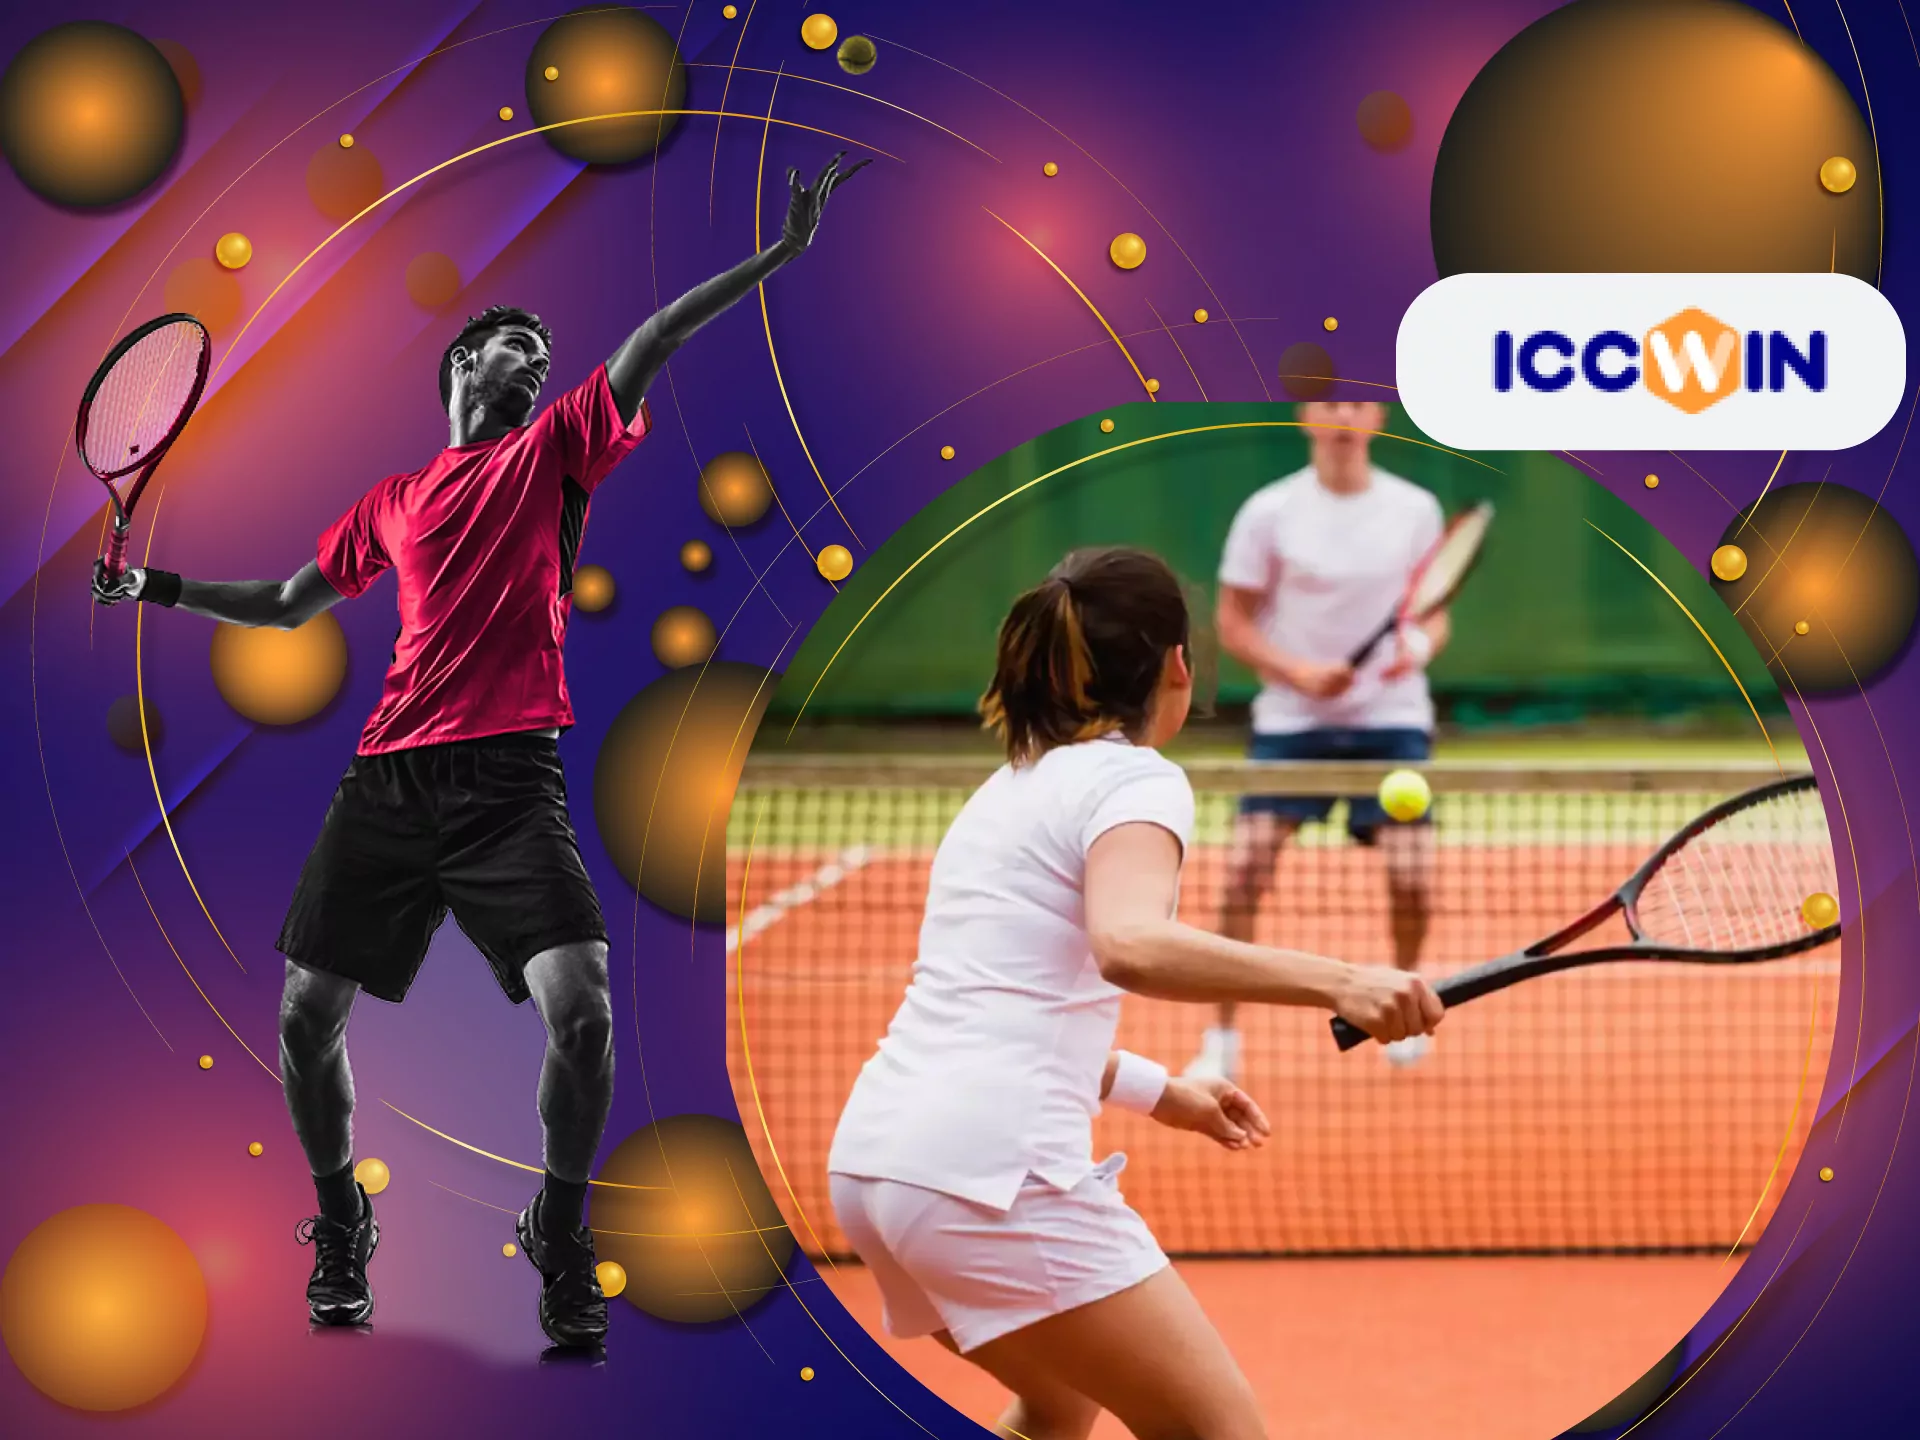 Tennis betting is available at ICCWIN.